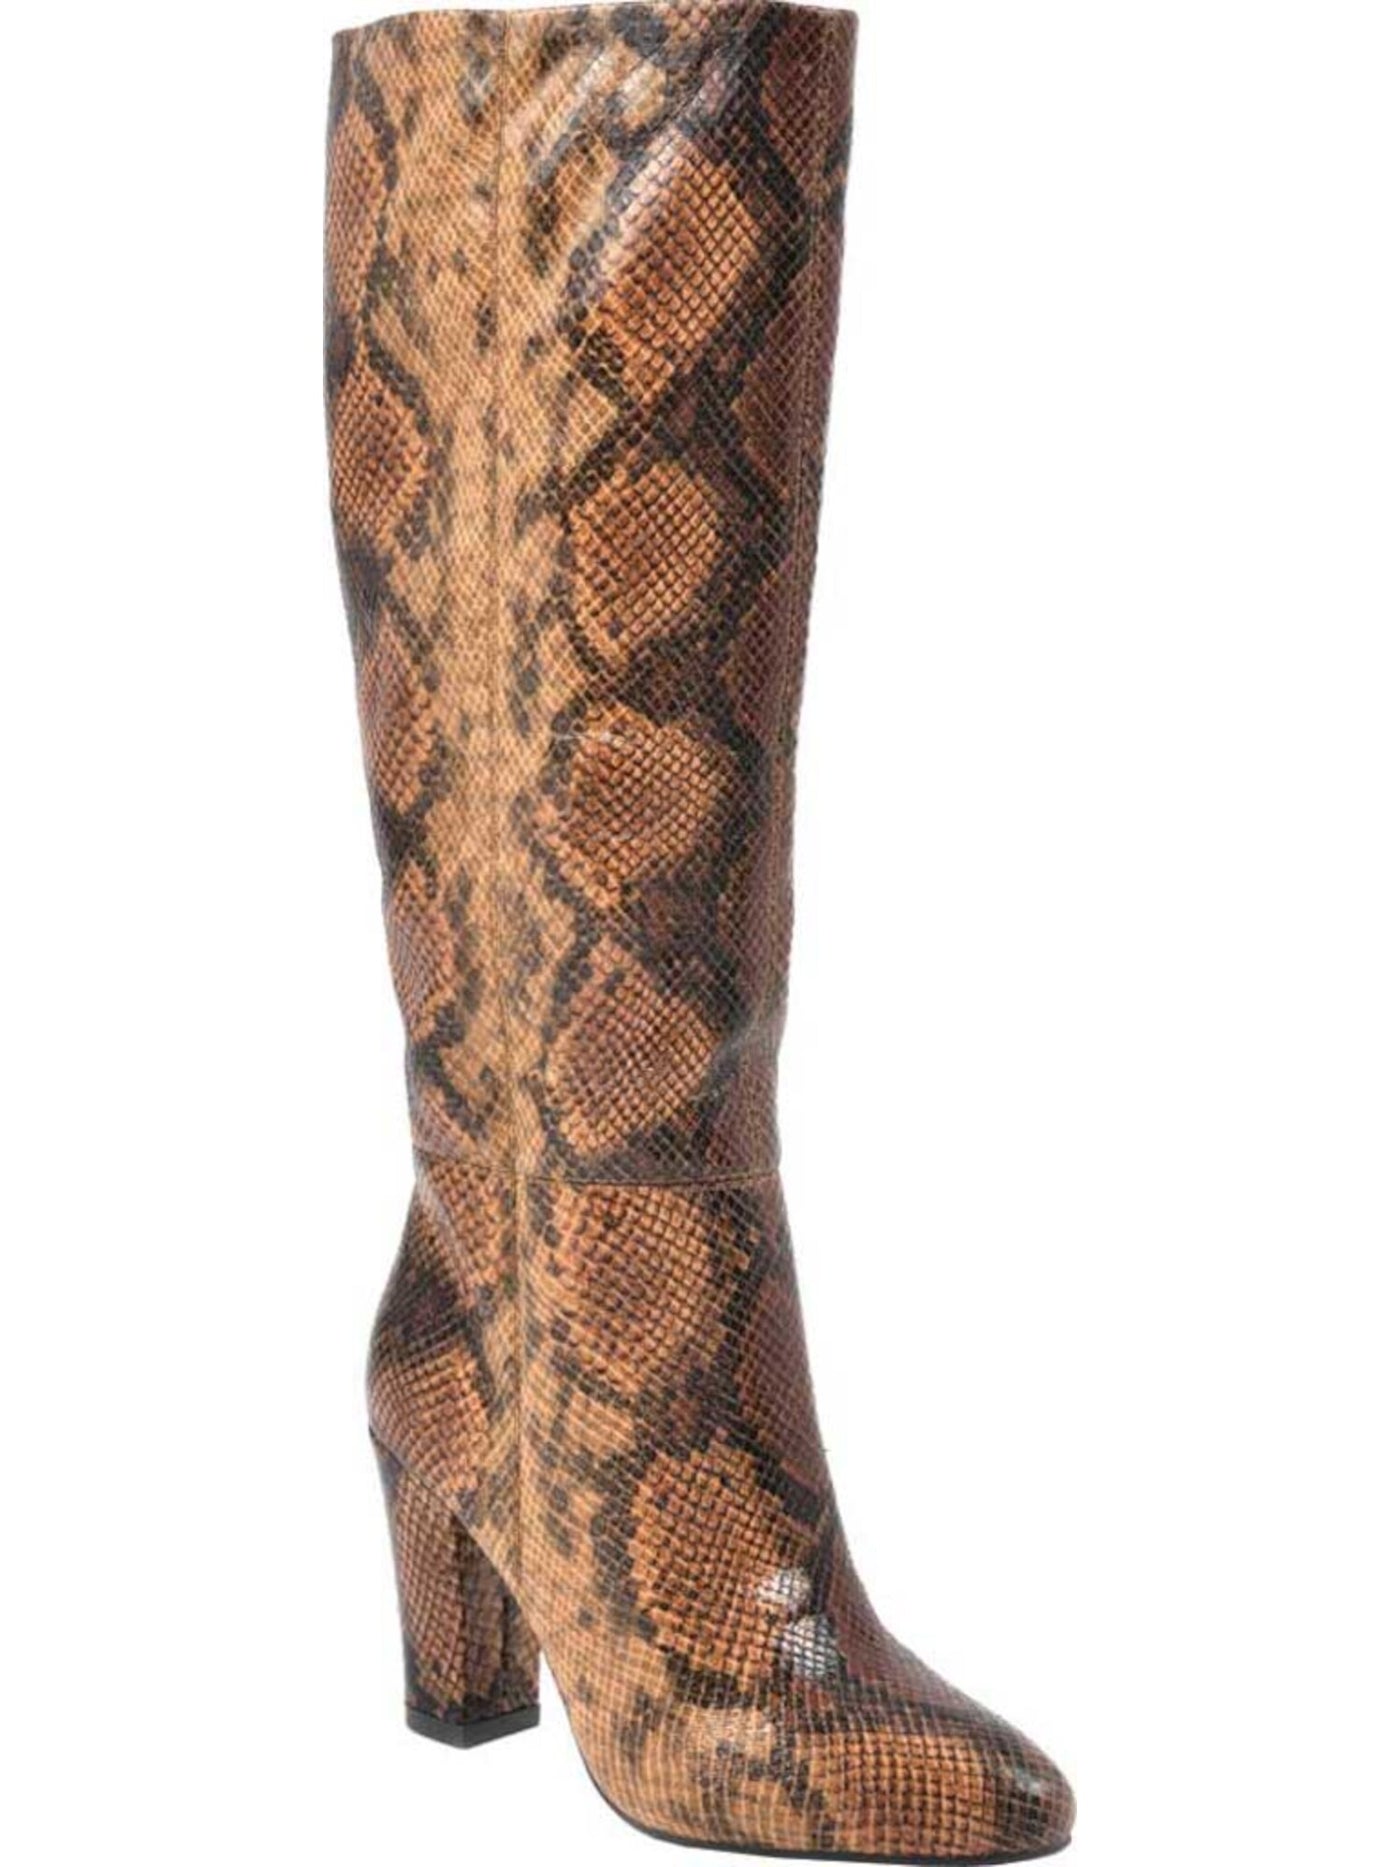 WHITE MOUNTAIN Womens Brown Animal Print Cushioned Almond Toe Sculpted Heel Dress Boots 5.5